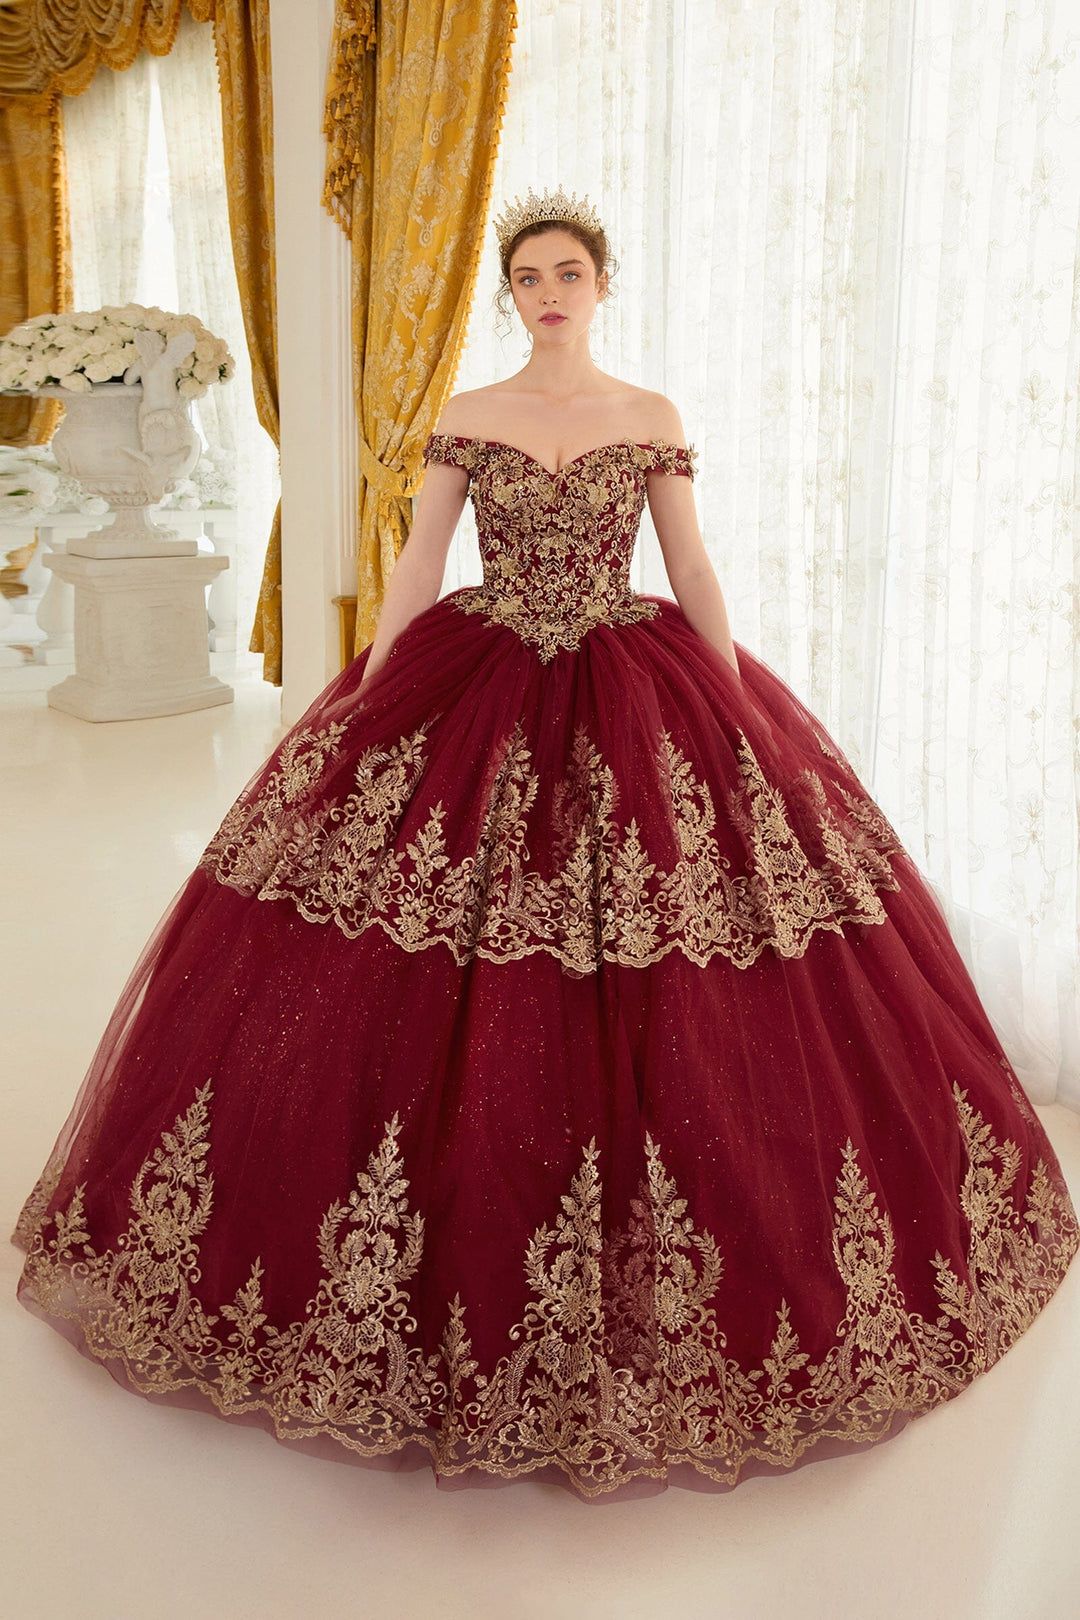 Details more than 165 red royal ball gowns